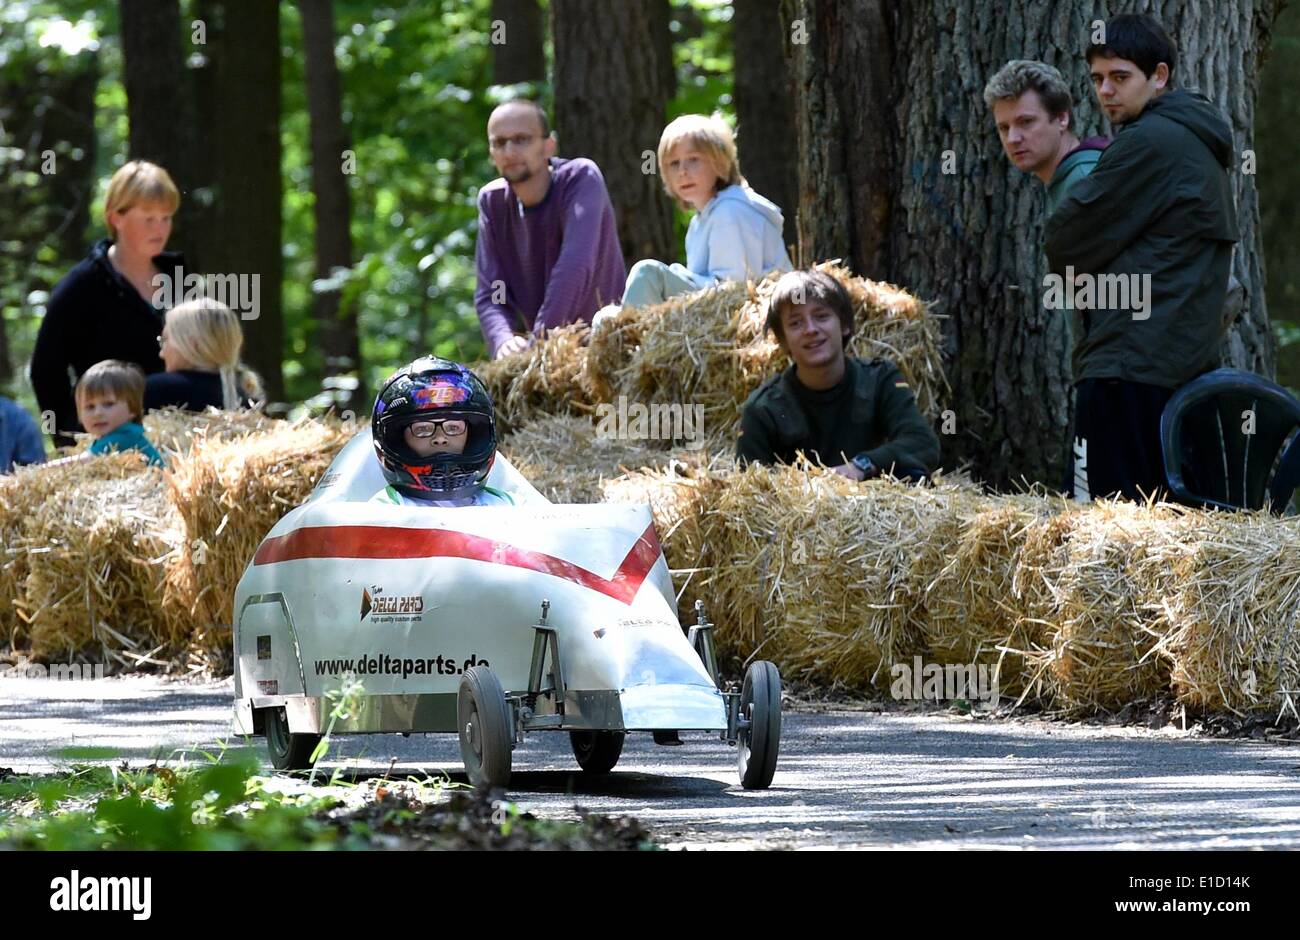 Rauen, Germany. 31st May, 2014. A soapbox in action during the soapbox car race in Rauen, Germany, 31 May 2014. More than fifty participants take part in the gravity racer race. Photo: Patrick Pleul/dpa/Alamy Live News Stock Photo